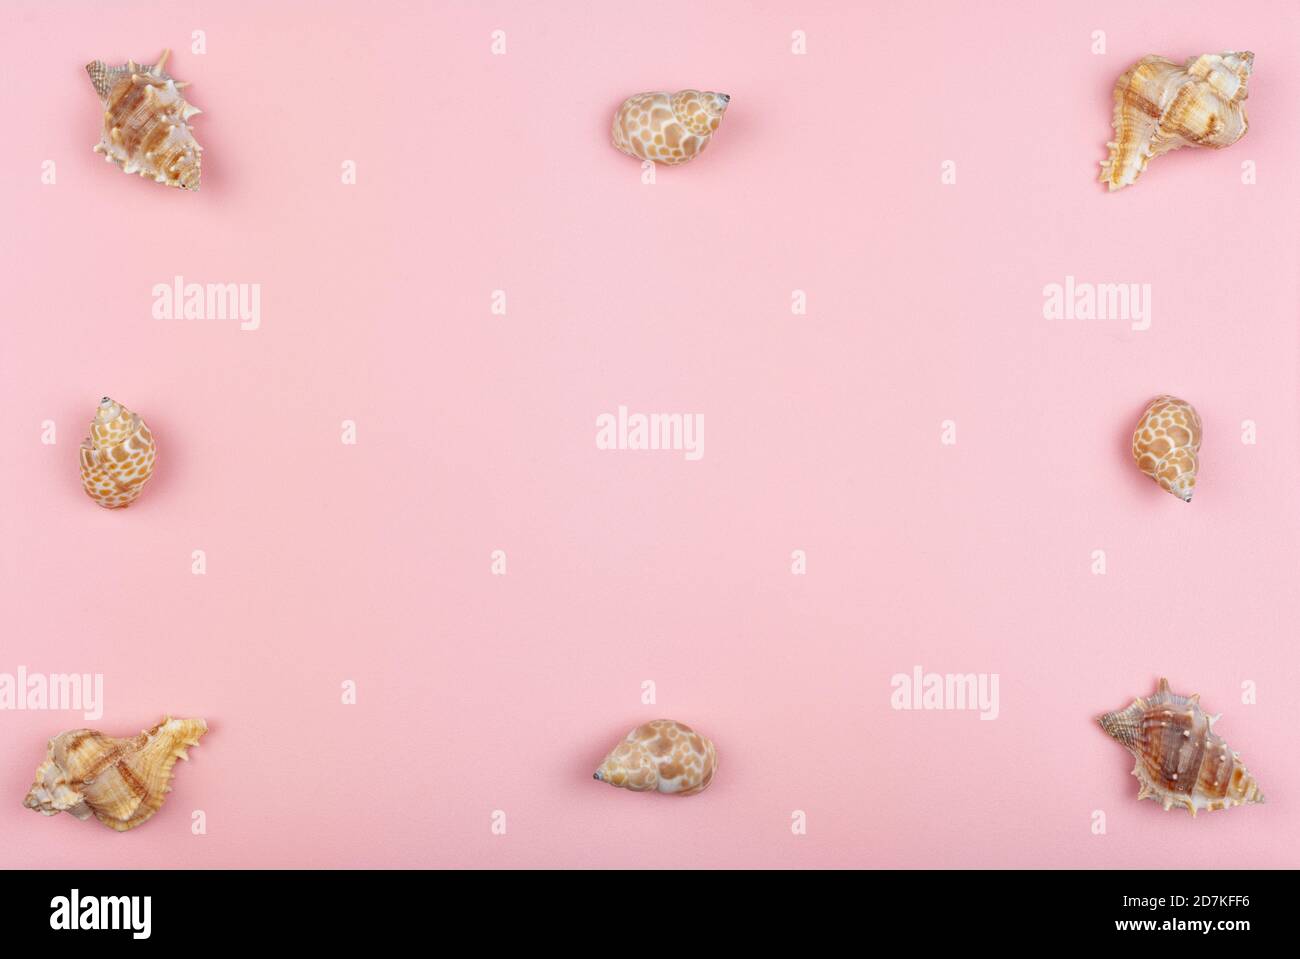 eight shells on a pink background Stock Photo